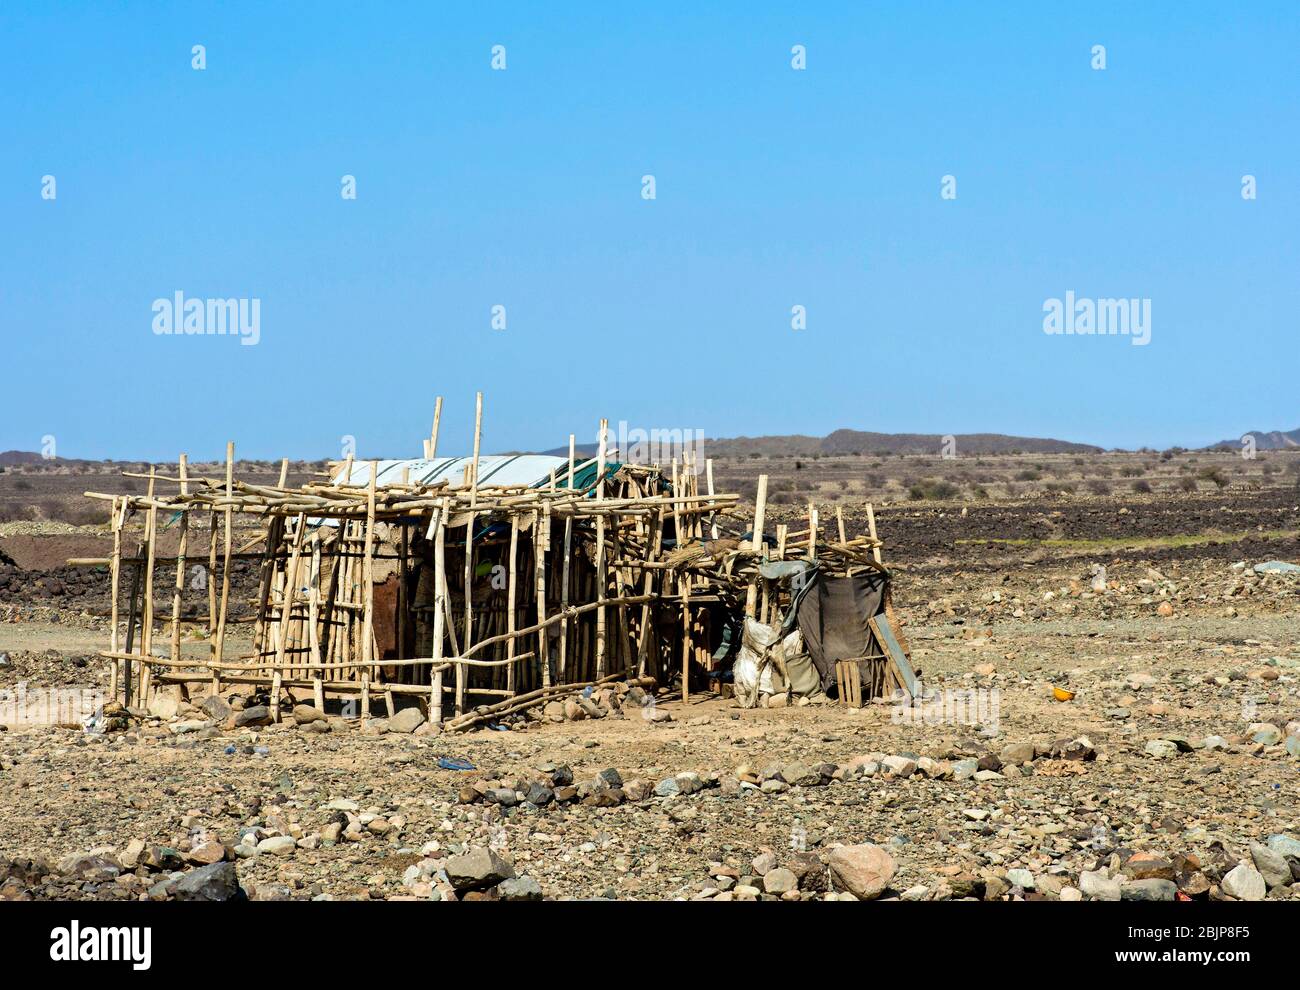 Traditional shelter of Afar nomads, Danakil Valley, Afar Province, Ethiopia Stock Photo